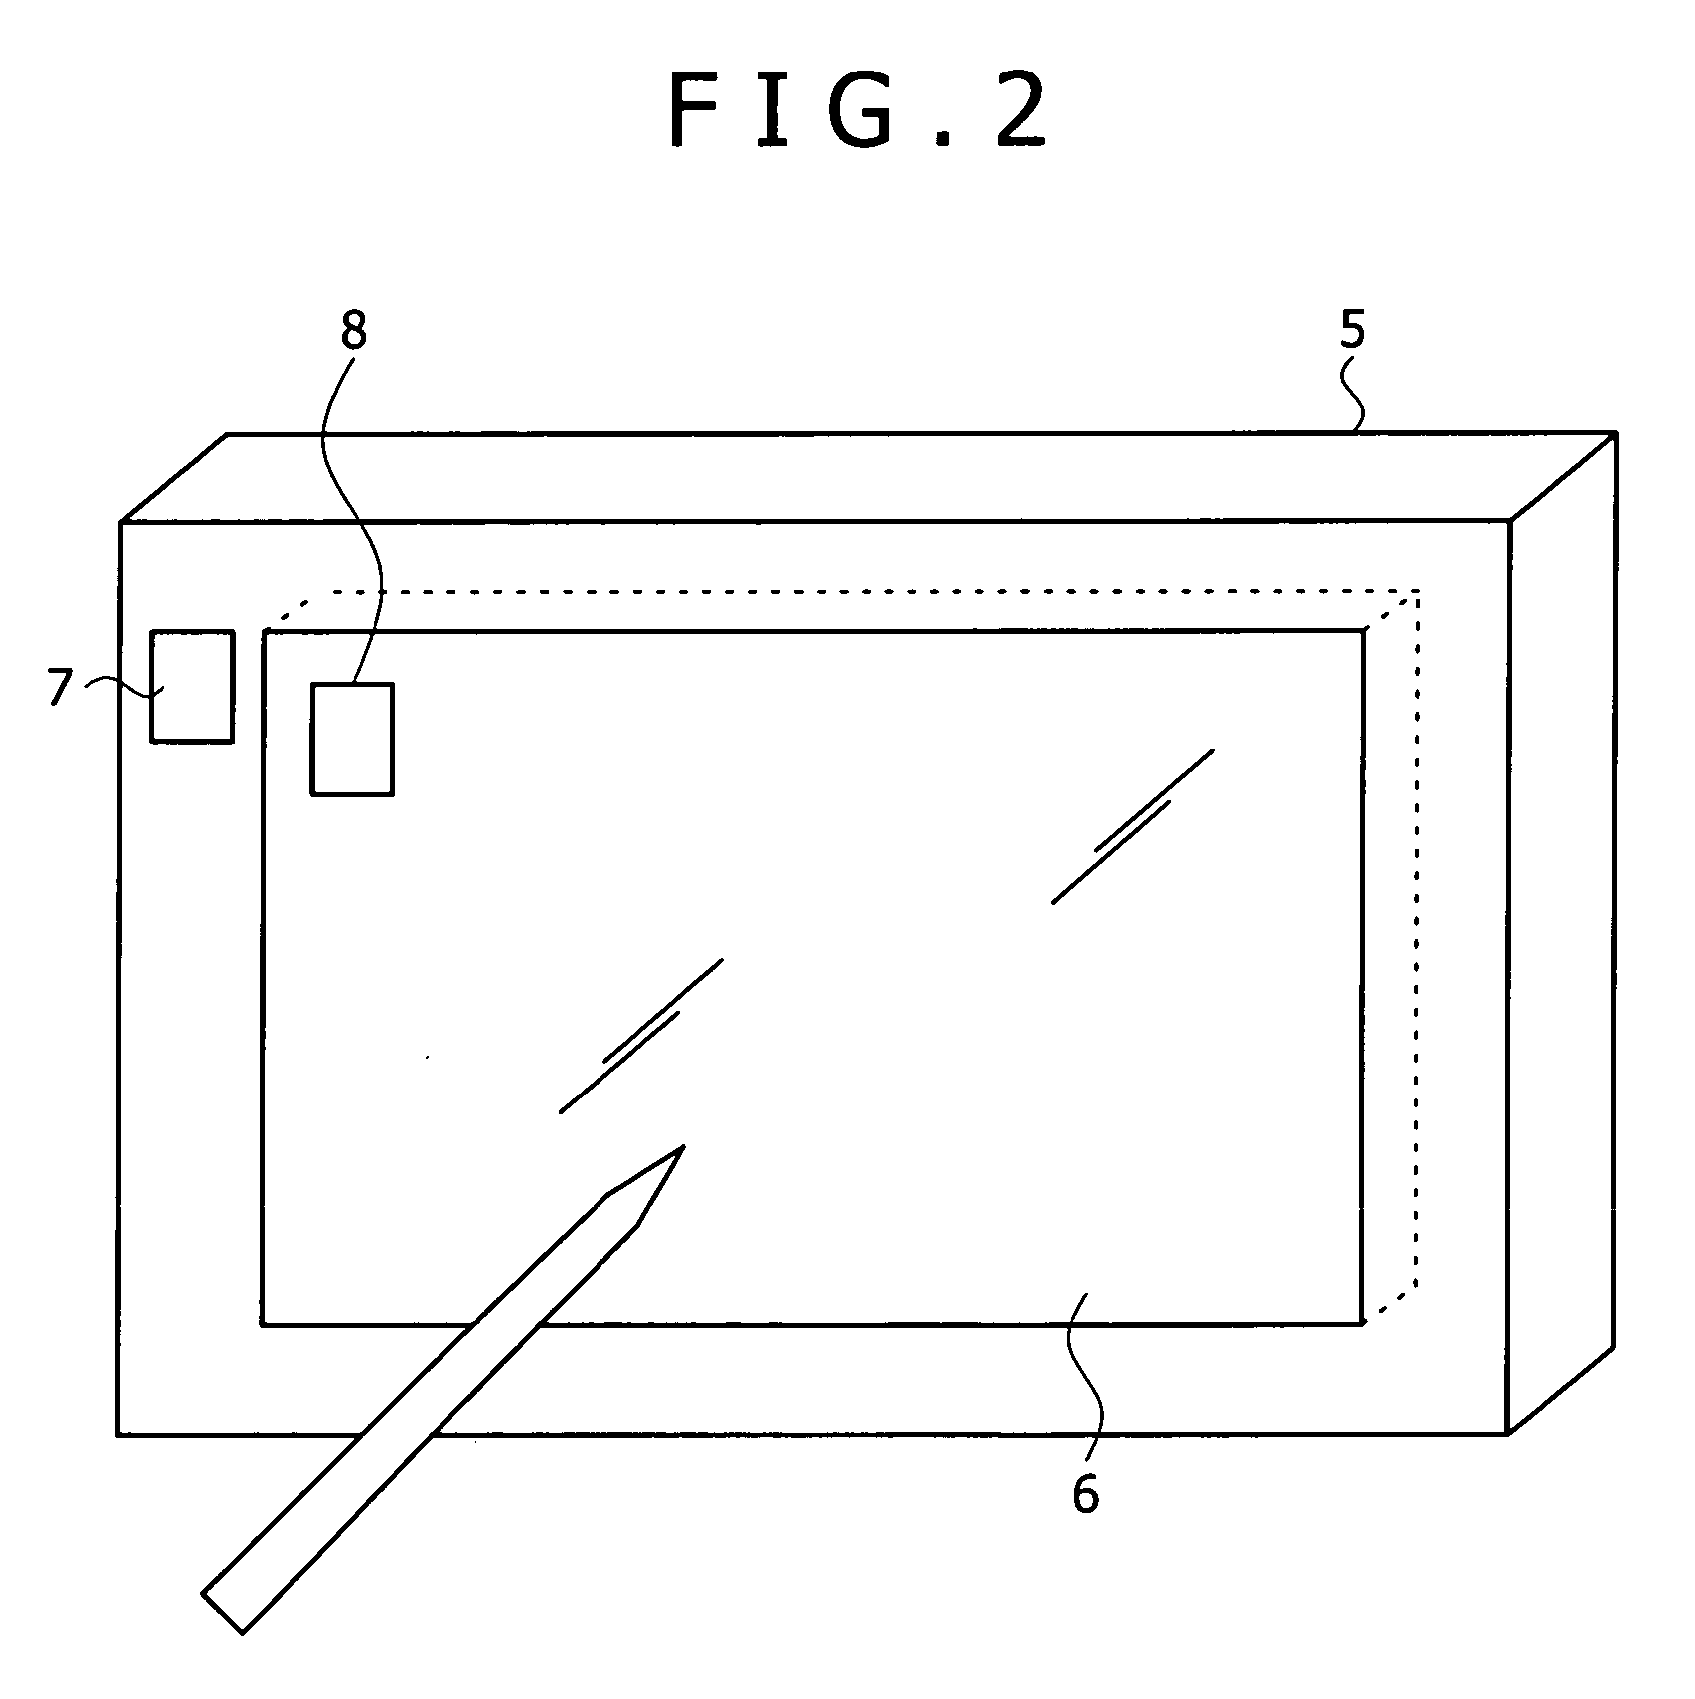 Information-processing apparatus and programs used in information-processing apparatus